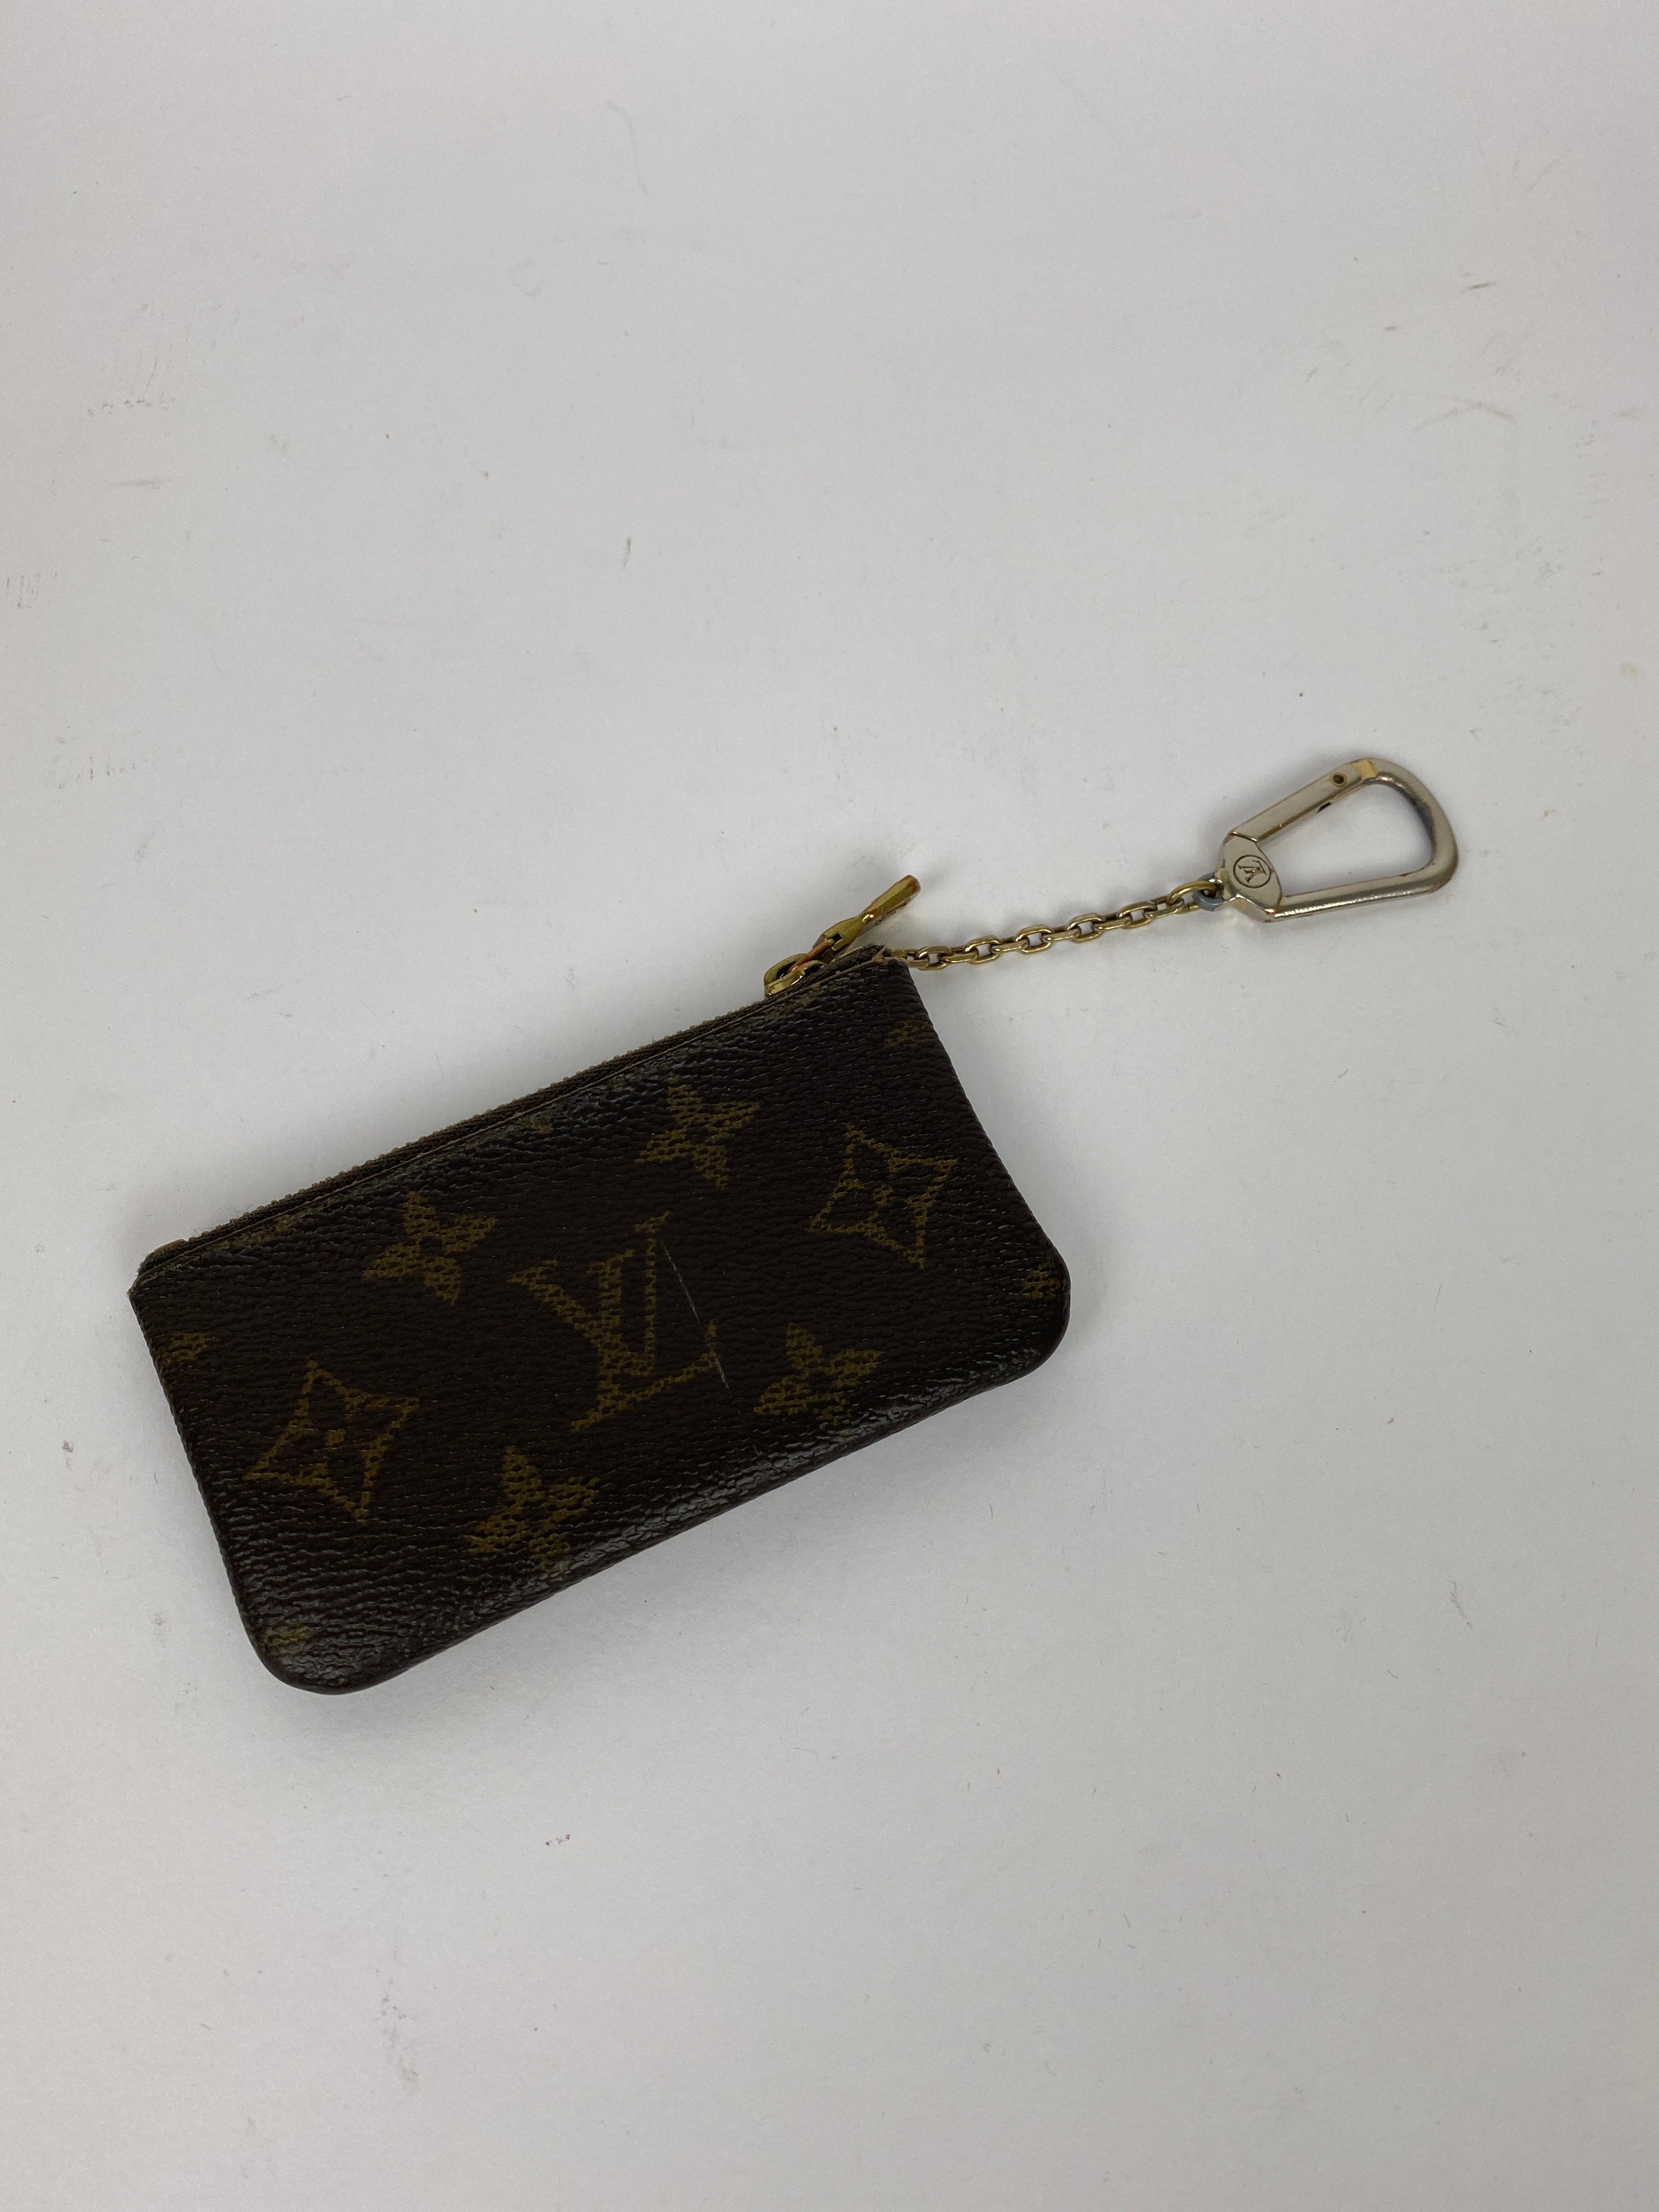 Loveyourbags - Available Now💘Brand new LOUIS VUITTON KEY POUCH